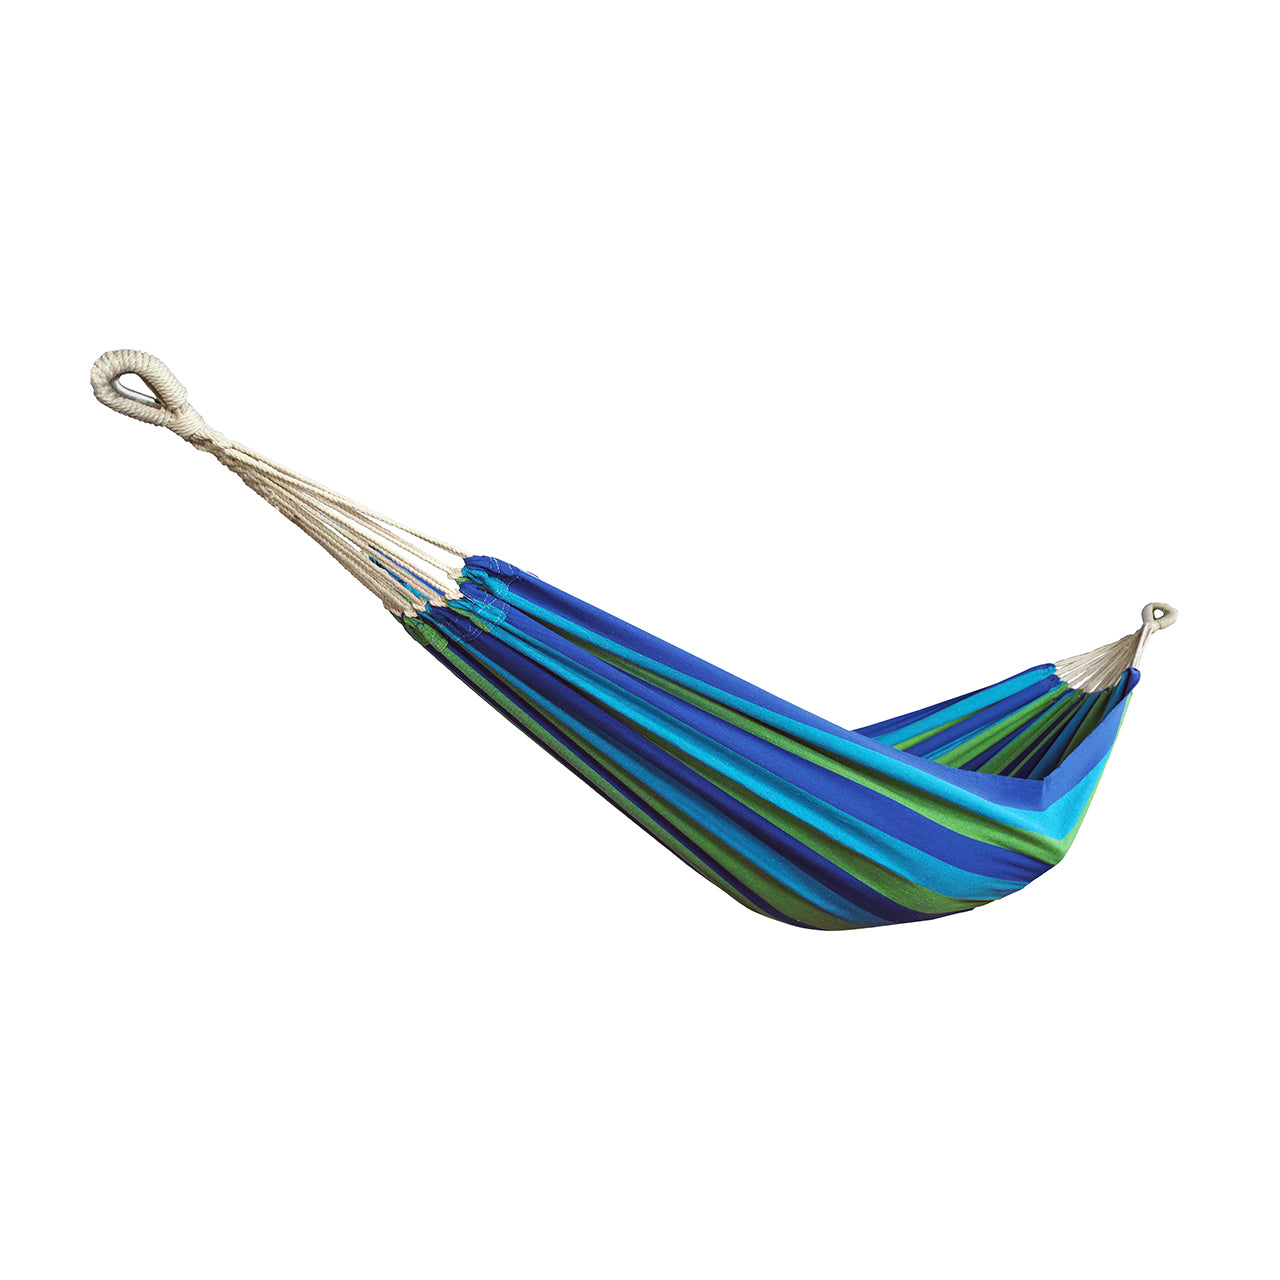 Bliss Hammocks 40-inch Wide Hammock in a Bag with Hand-woven Rope loops in the seabreeze stripe variation.